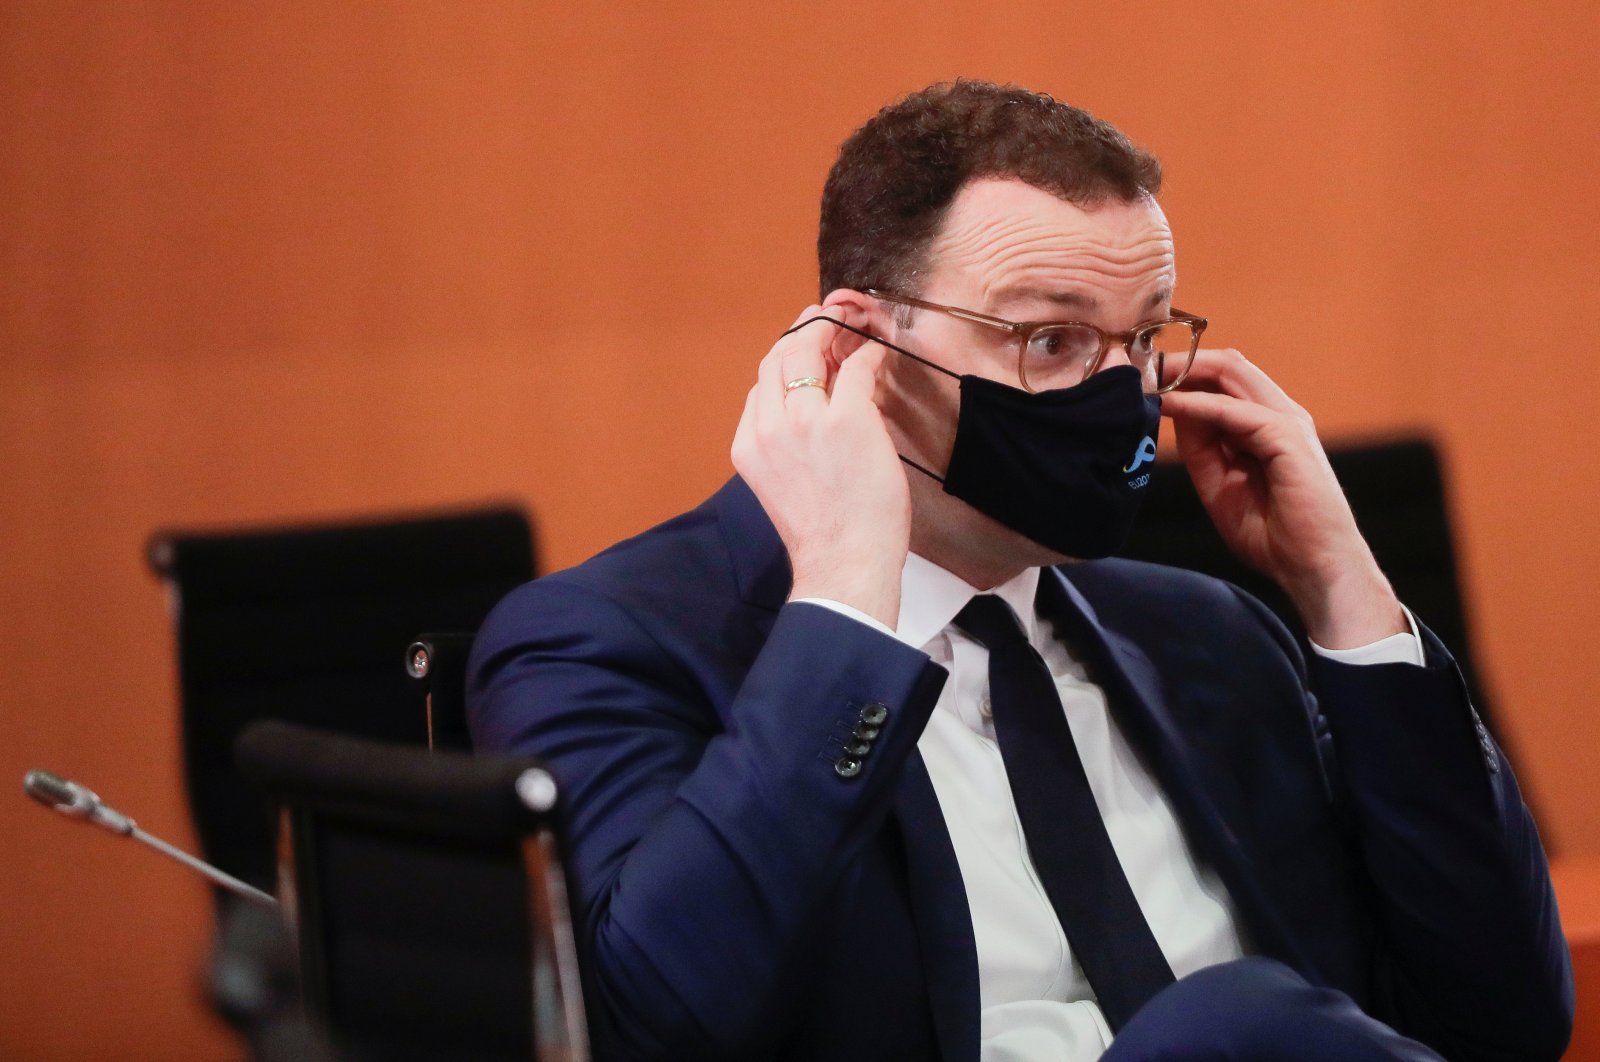 German Health Minister Jens Spahn adjusts his mask as he attends the weekly Cabinet meeting of the government at the German Chancellery, Berlin, Oct. 21, 2020. (REUTERS Photo)